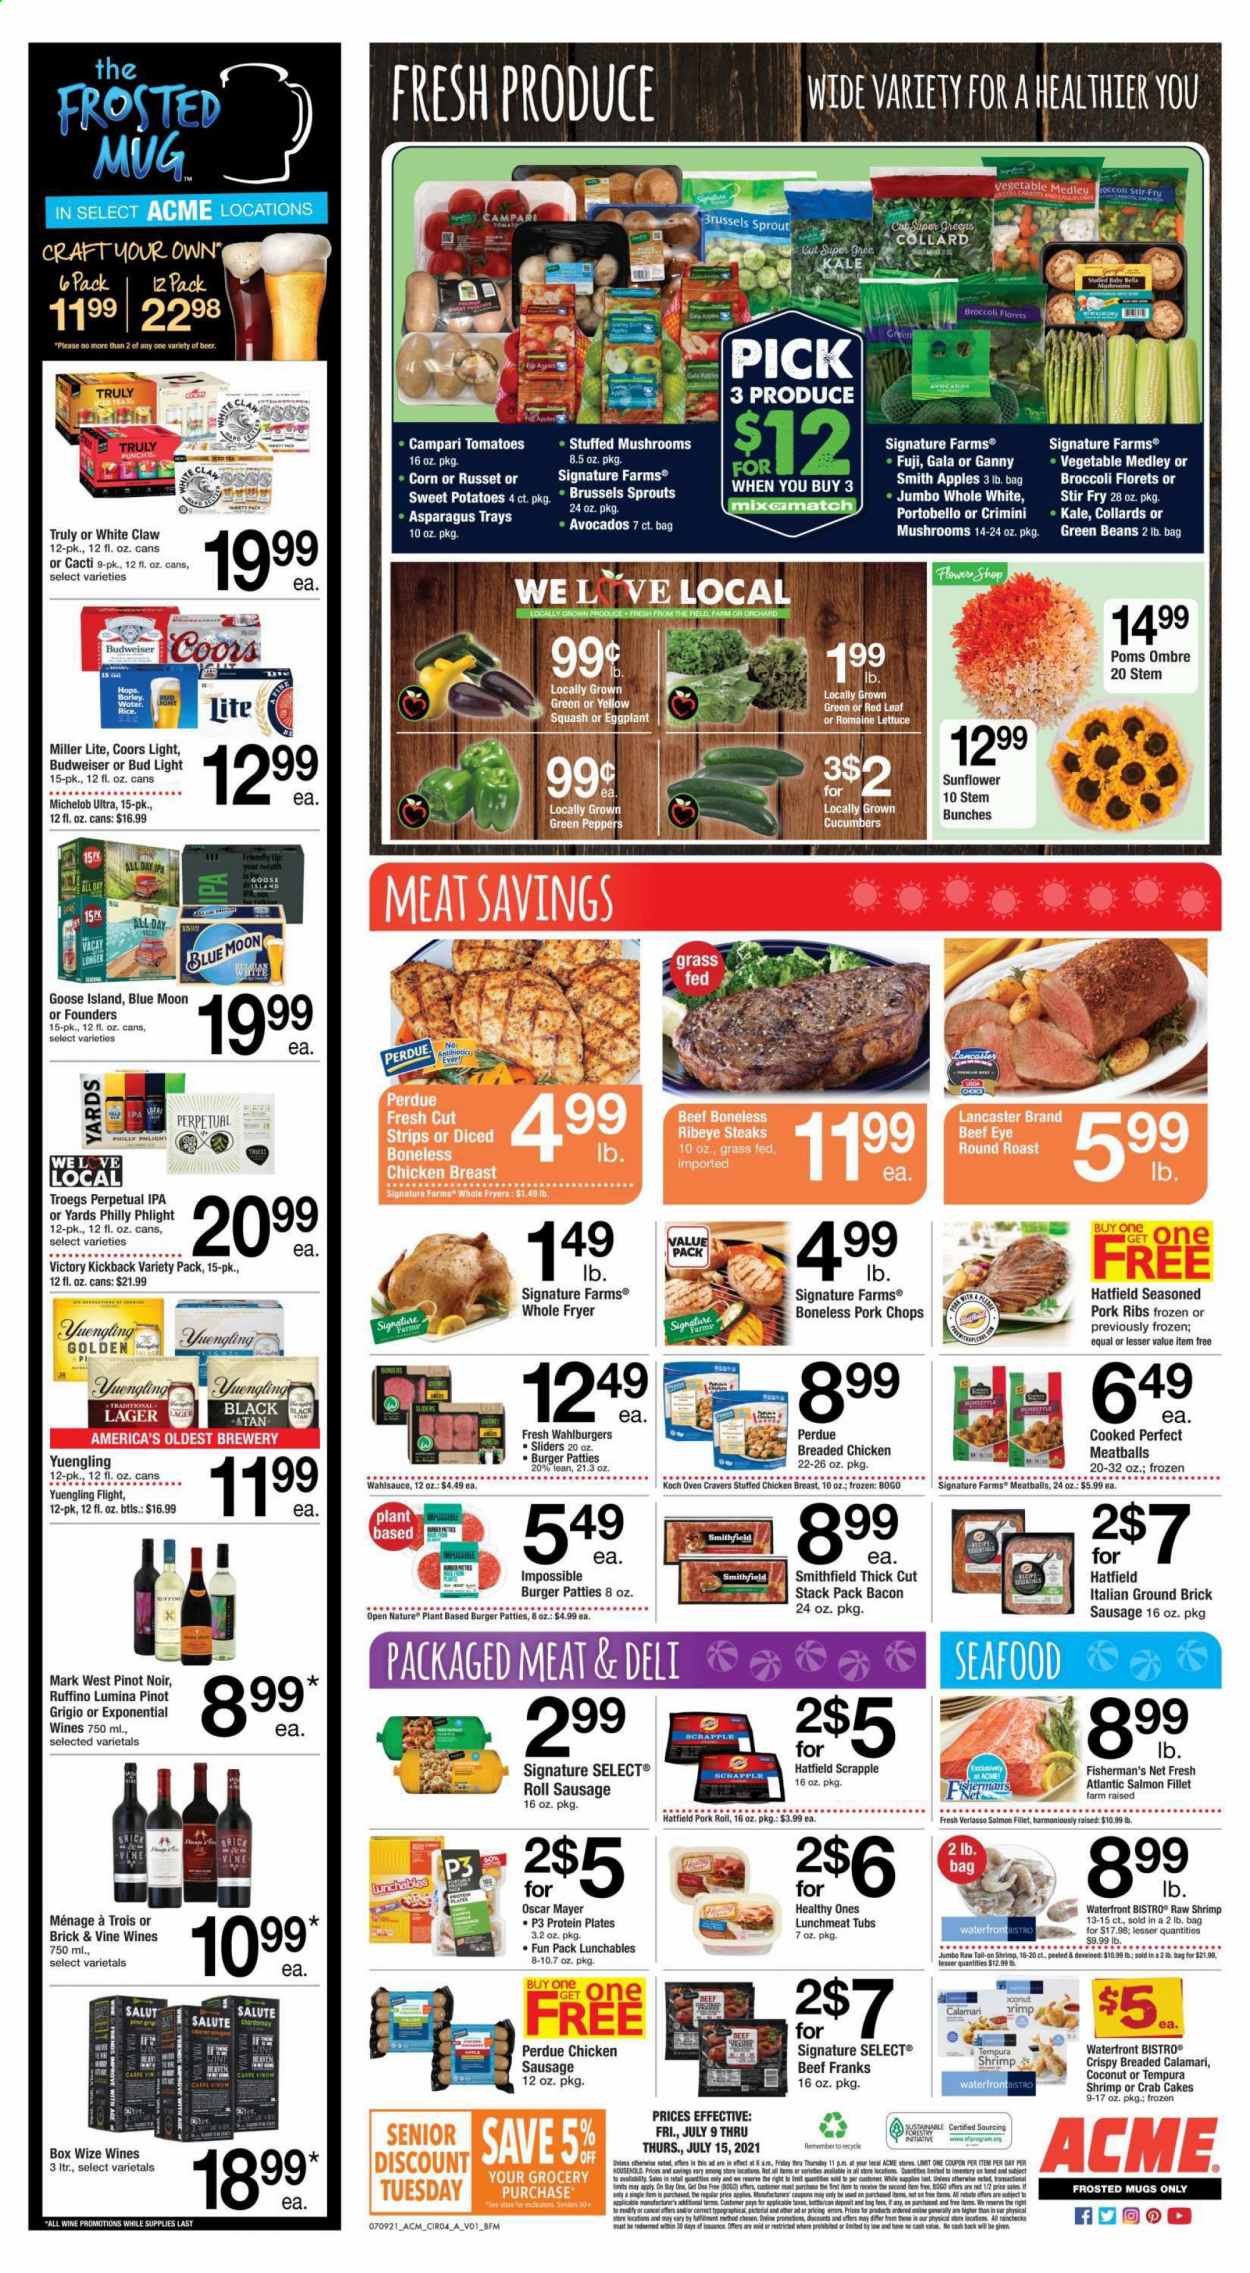 thumbnail - ACME Flyer - 07/09/2021 - 07/15/2021 - Sales products - portobello mushrooms, mushrooms, asparagus, beans, broccoli, corn, cucumber, green beans, russet potatoes, sweet potato, tomatoes, kale, potatoes, lettuce, peppers, eggplant, brussel sprouts, yellow squash, avocado, Gala, coconut, calamari, salmon, salmon fillet, seafood, shrimps, crab cake, meatballs, hamburger, fried chicken, Perdue®, Lunchables, stuffed chicken, bacon, Oscar Mayer, sausage, lunch meat, strips, tea, red wine, white wine, Chardonnay, wine, Pinot Noir, Pinot Grigio, White Claw, TRULY, beer, Budweiser, Miller Lite, Coors, Blue Moon, Yuengling, Michelob, Bud Light, Lager, IPA, beef meat, steak, eye of round, round roast, ribeye steak, burger patties, pork chops, pork meat, pork ribs, mug. Page 4.